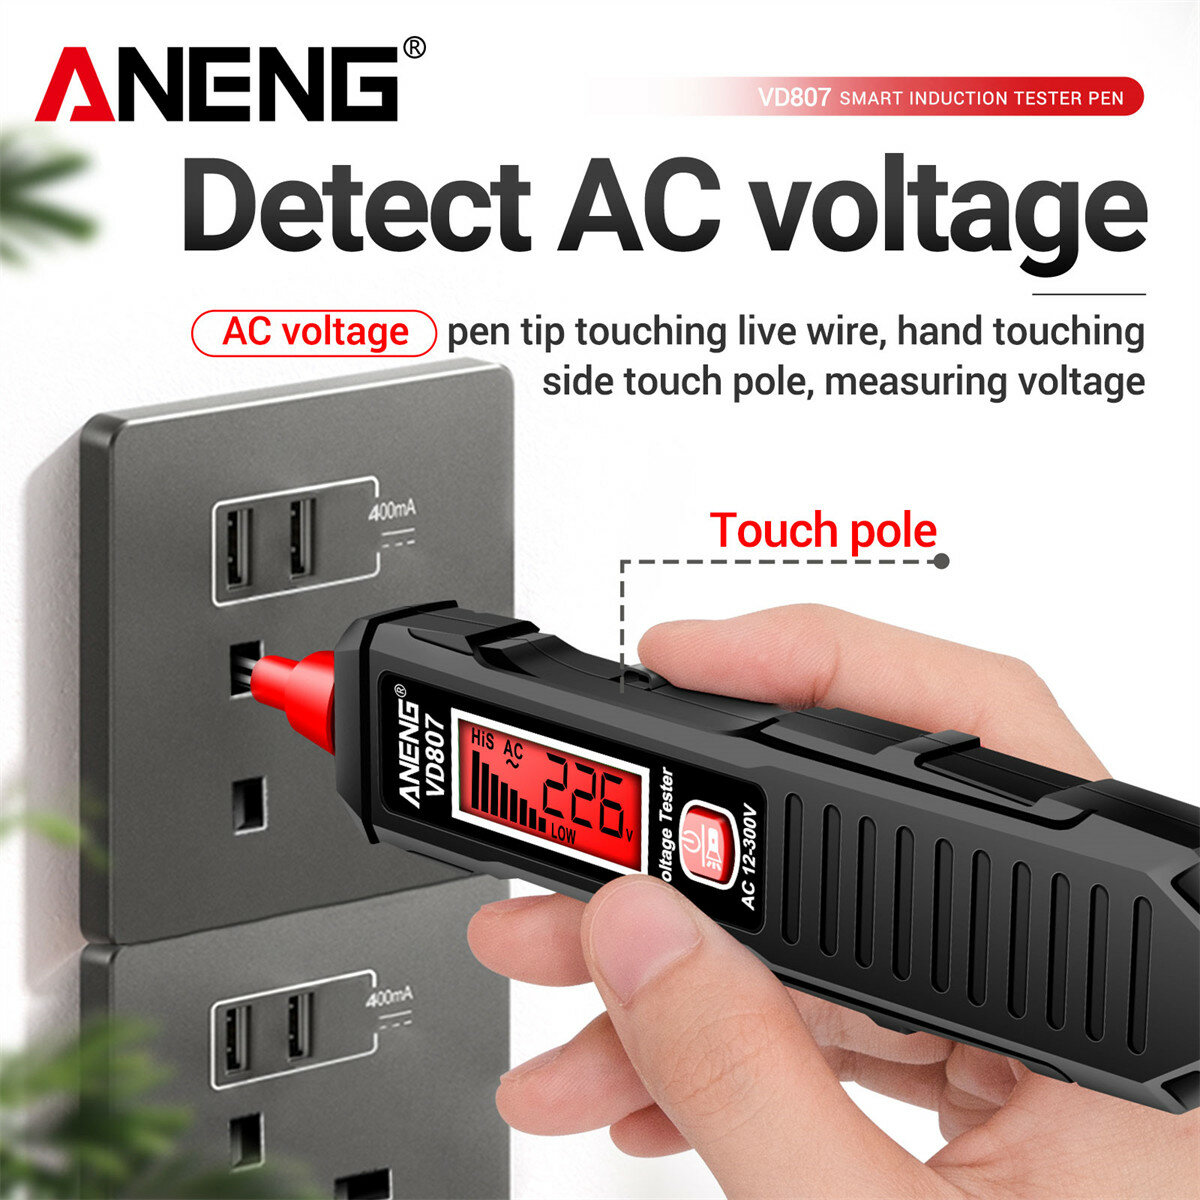 ANENG VD807 Voltage Tester Pen High-Sensitivity Induction 12-300V Measurement Range with Sound and Light Alarm System LED Lighting Auto Power Off Safety Tool for Household and Professionals